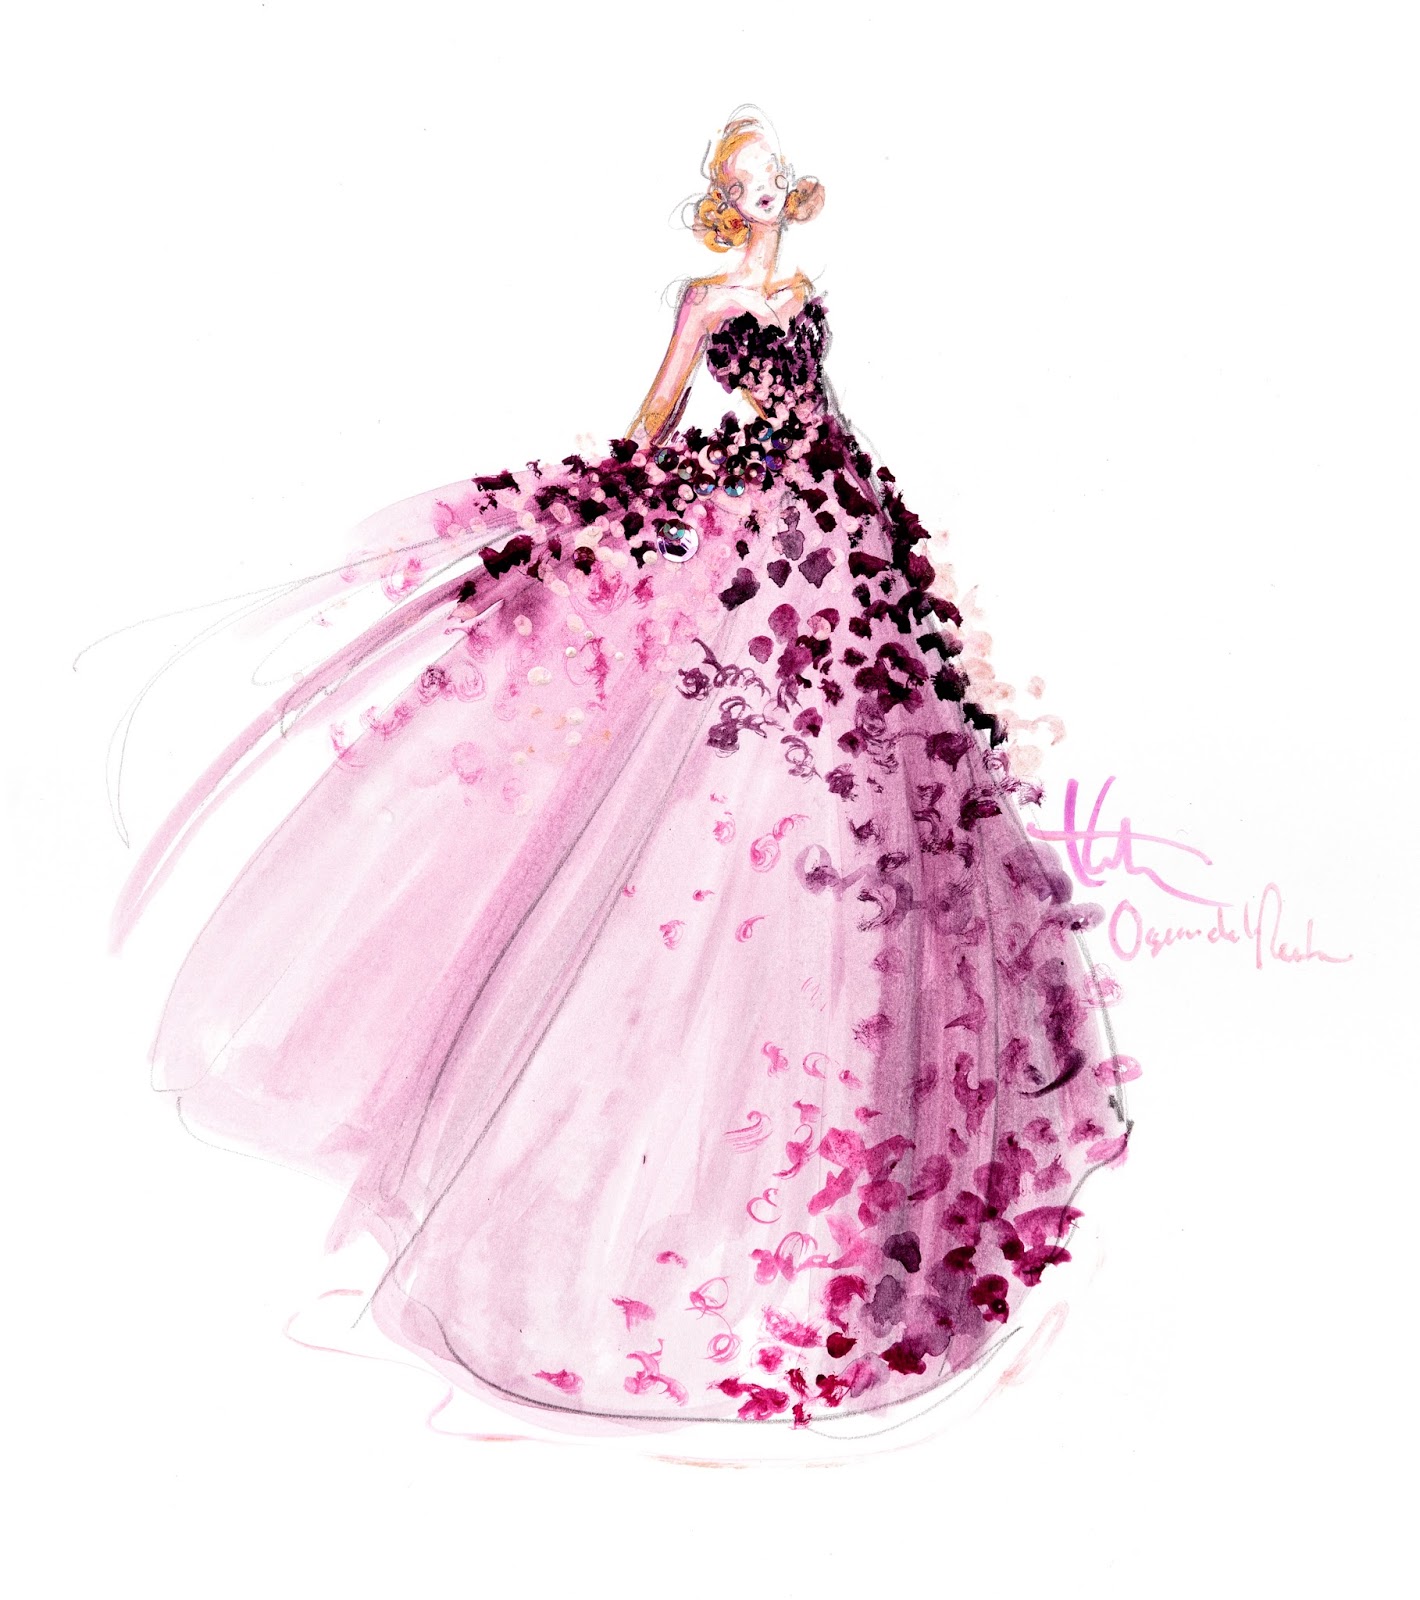 Artist Katie Rodgers Used Q-Tips To Create THE Most Amazing 2015 Oscar Gown Illustrations